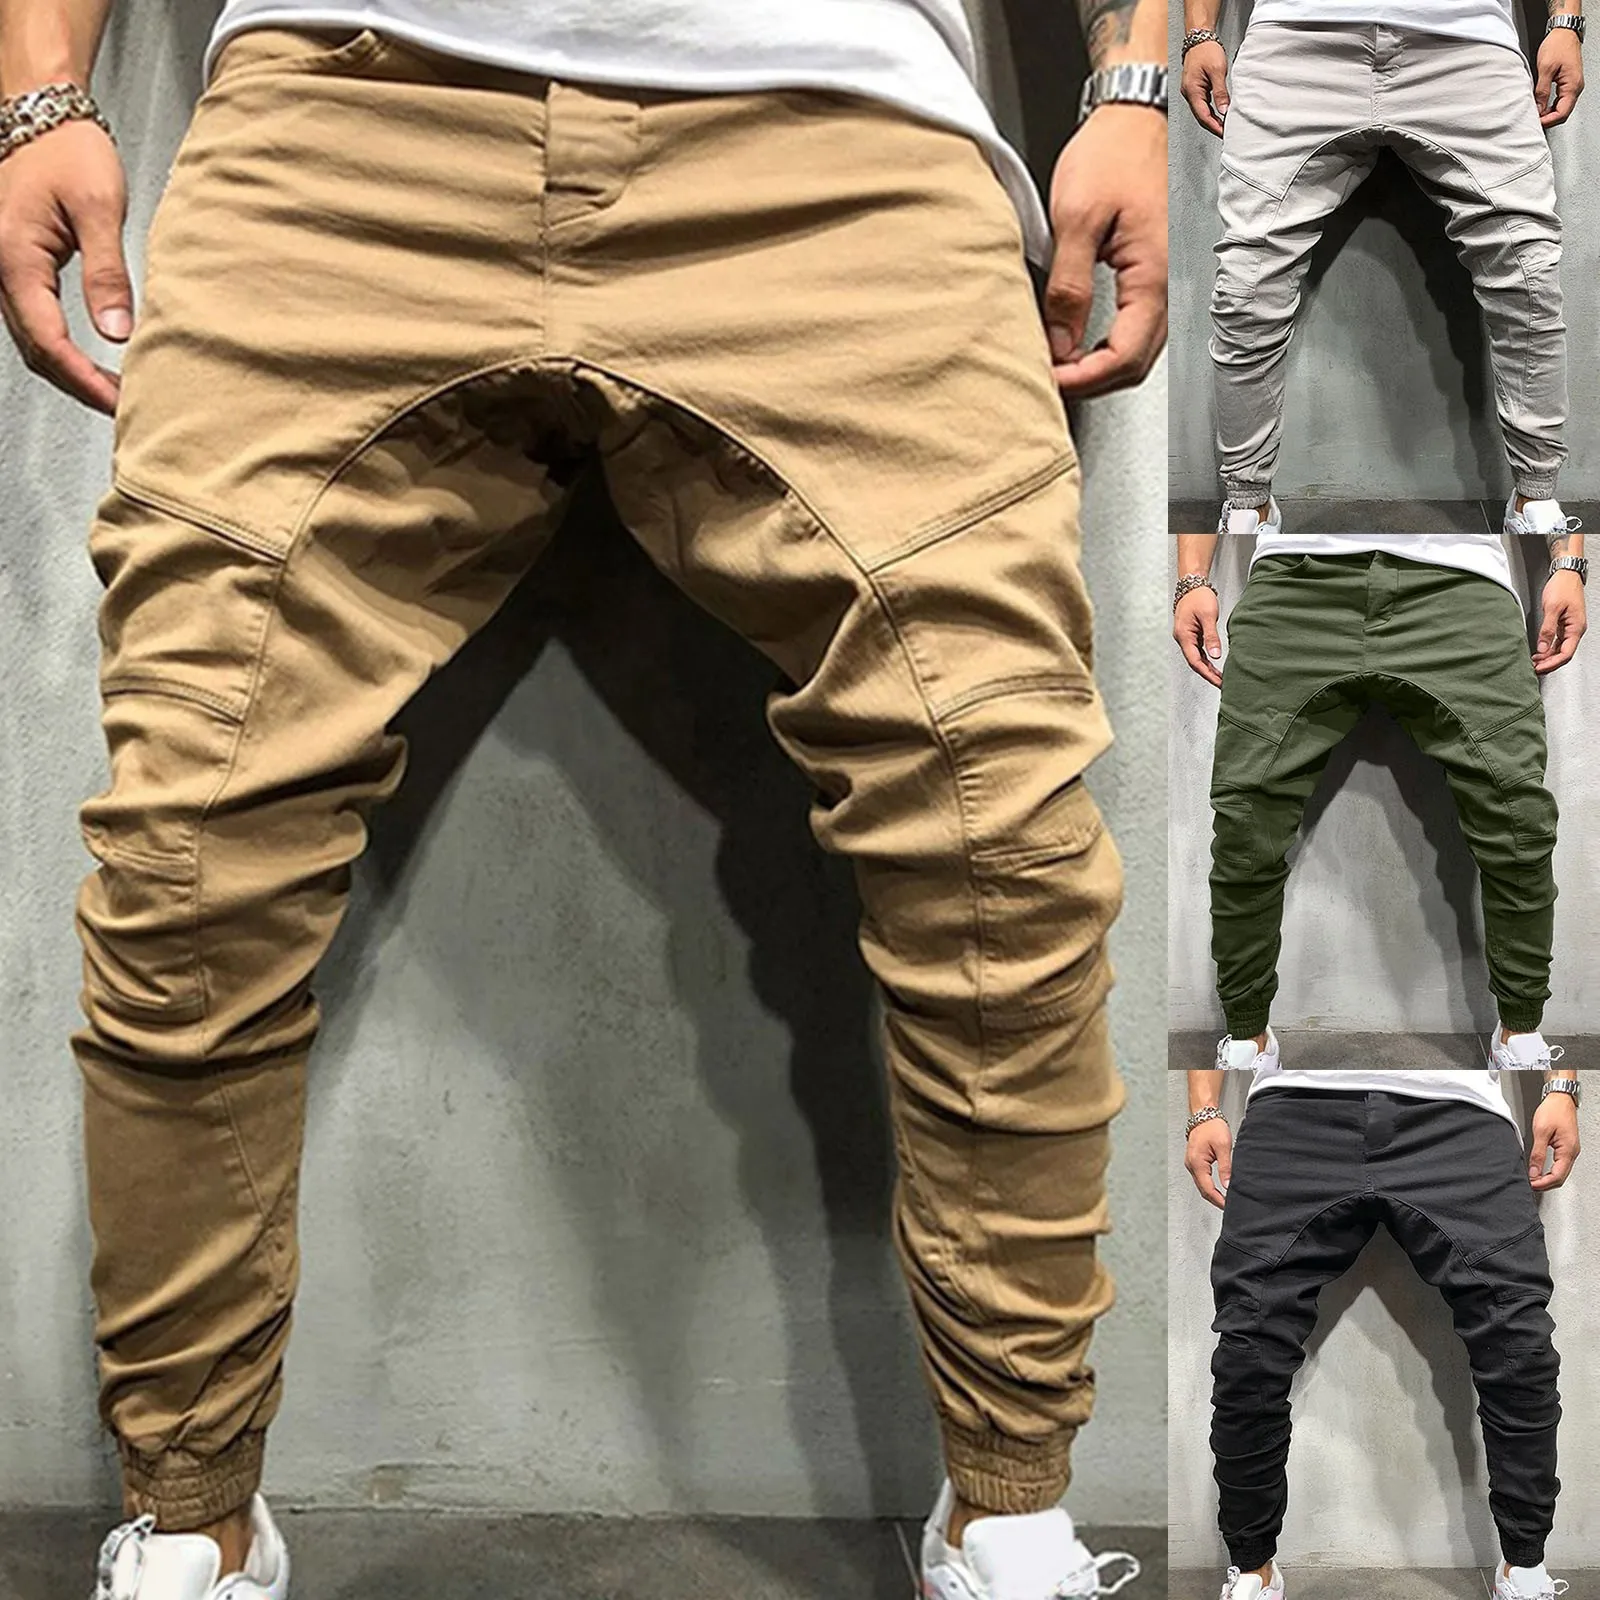 

Luxury Overalls Sports Men Casual Pants With Pockets Soild Color Man Trousers Y2k Clothes Skinny Straight Gym Work Pantalones